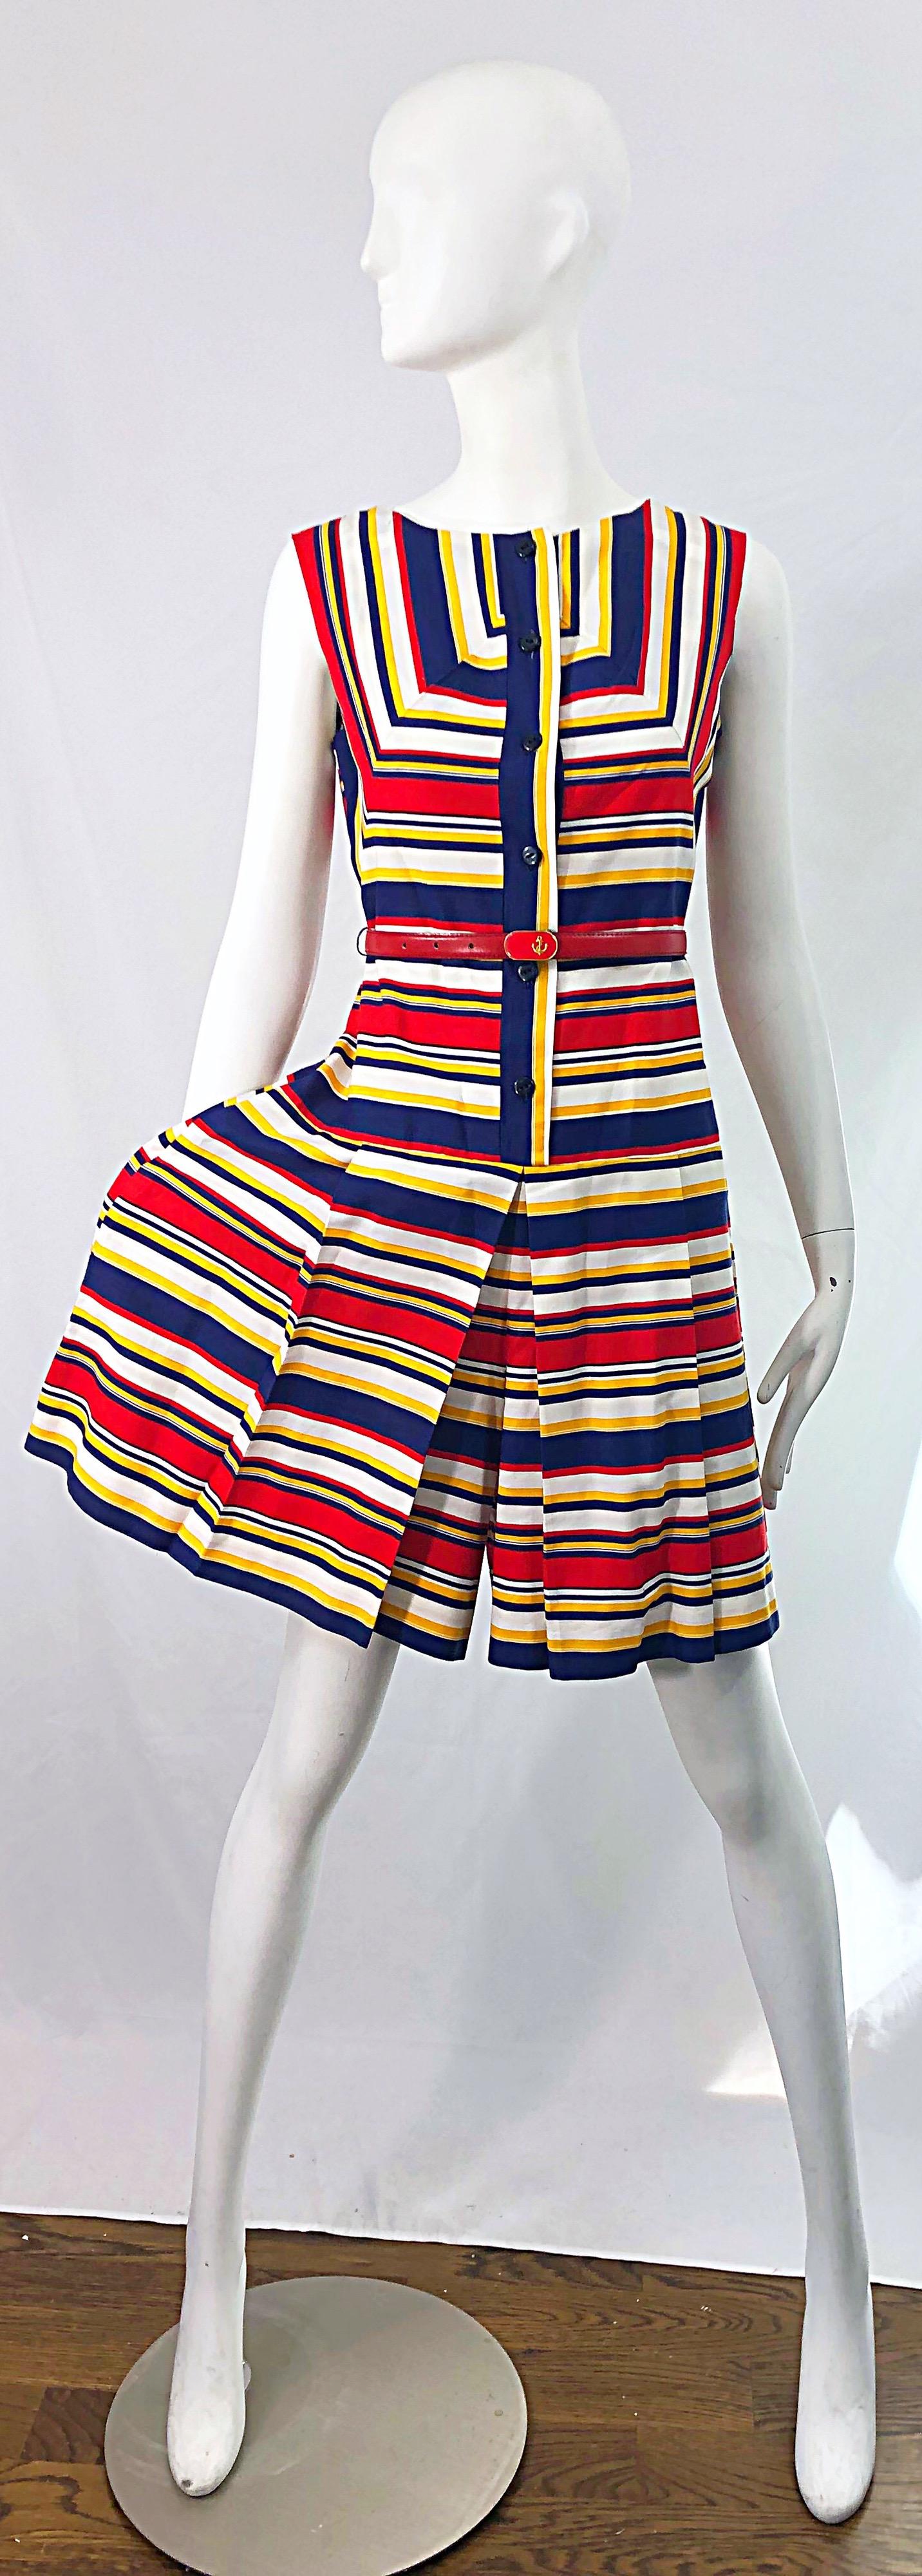 Chic 1960s JOAN CURTIS nautical belted cotton romper ! I thought this was a dress when I initially purchased this, but was pleasantly surprised when I went to photograph it, and realized that it was a romper! Features navy blue, red, yellow and